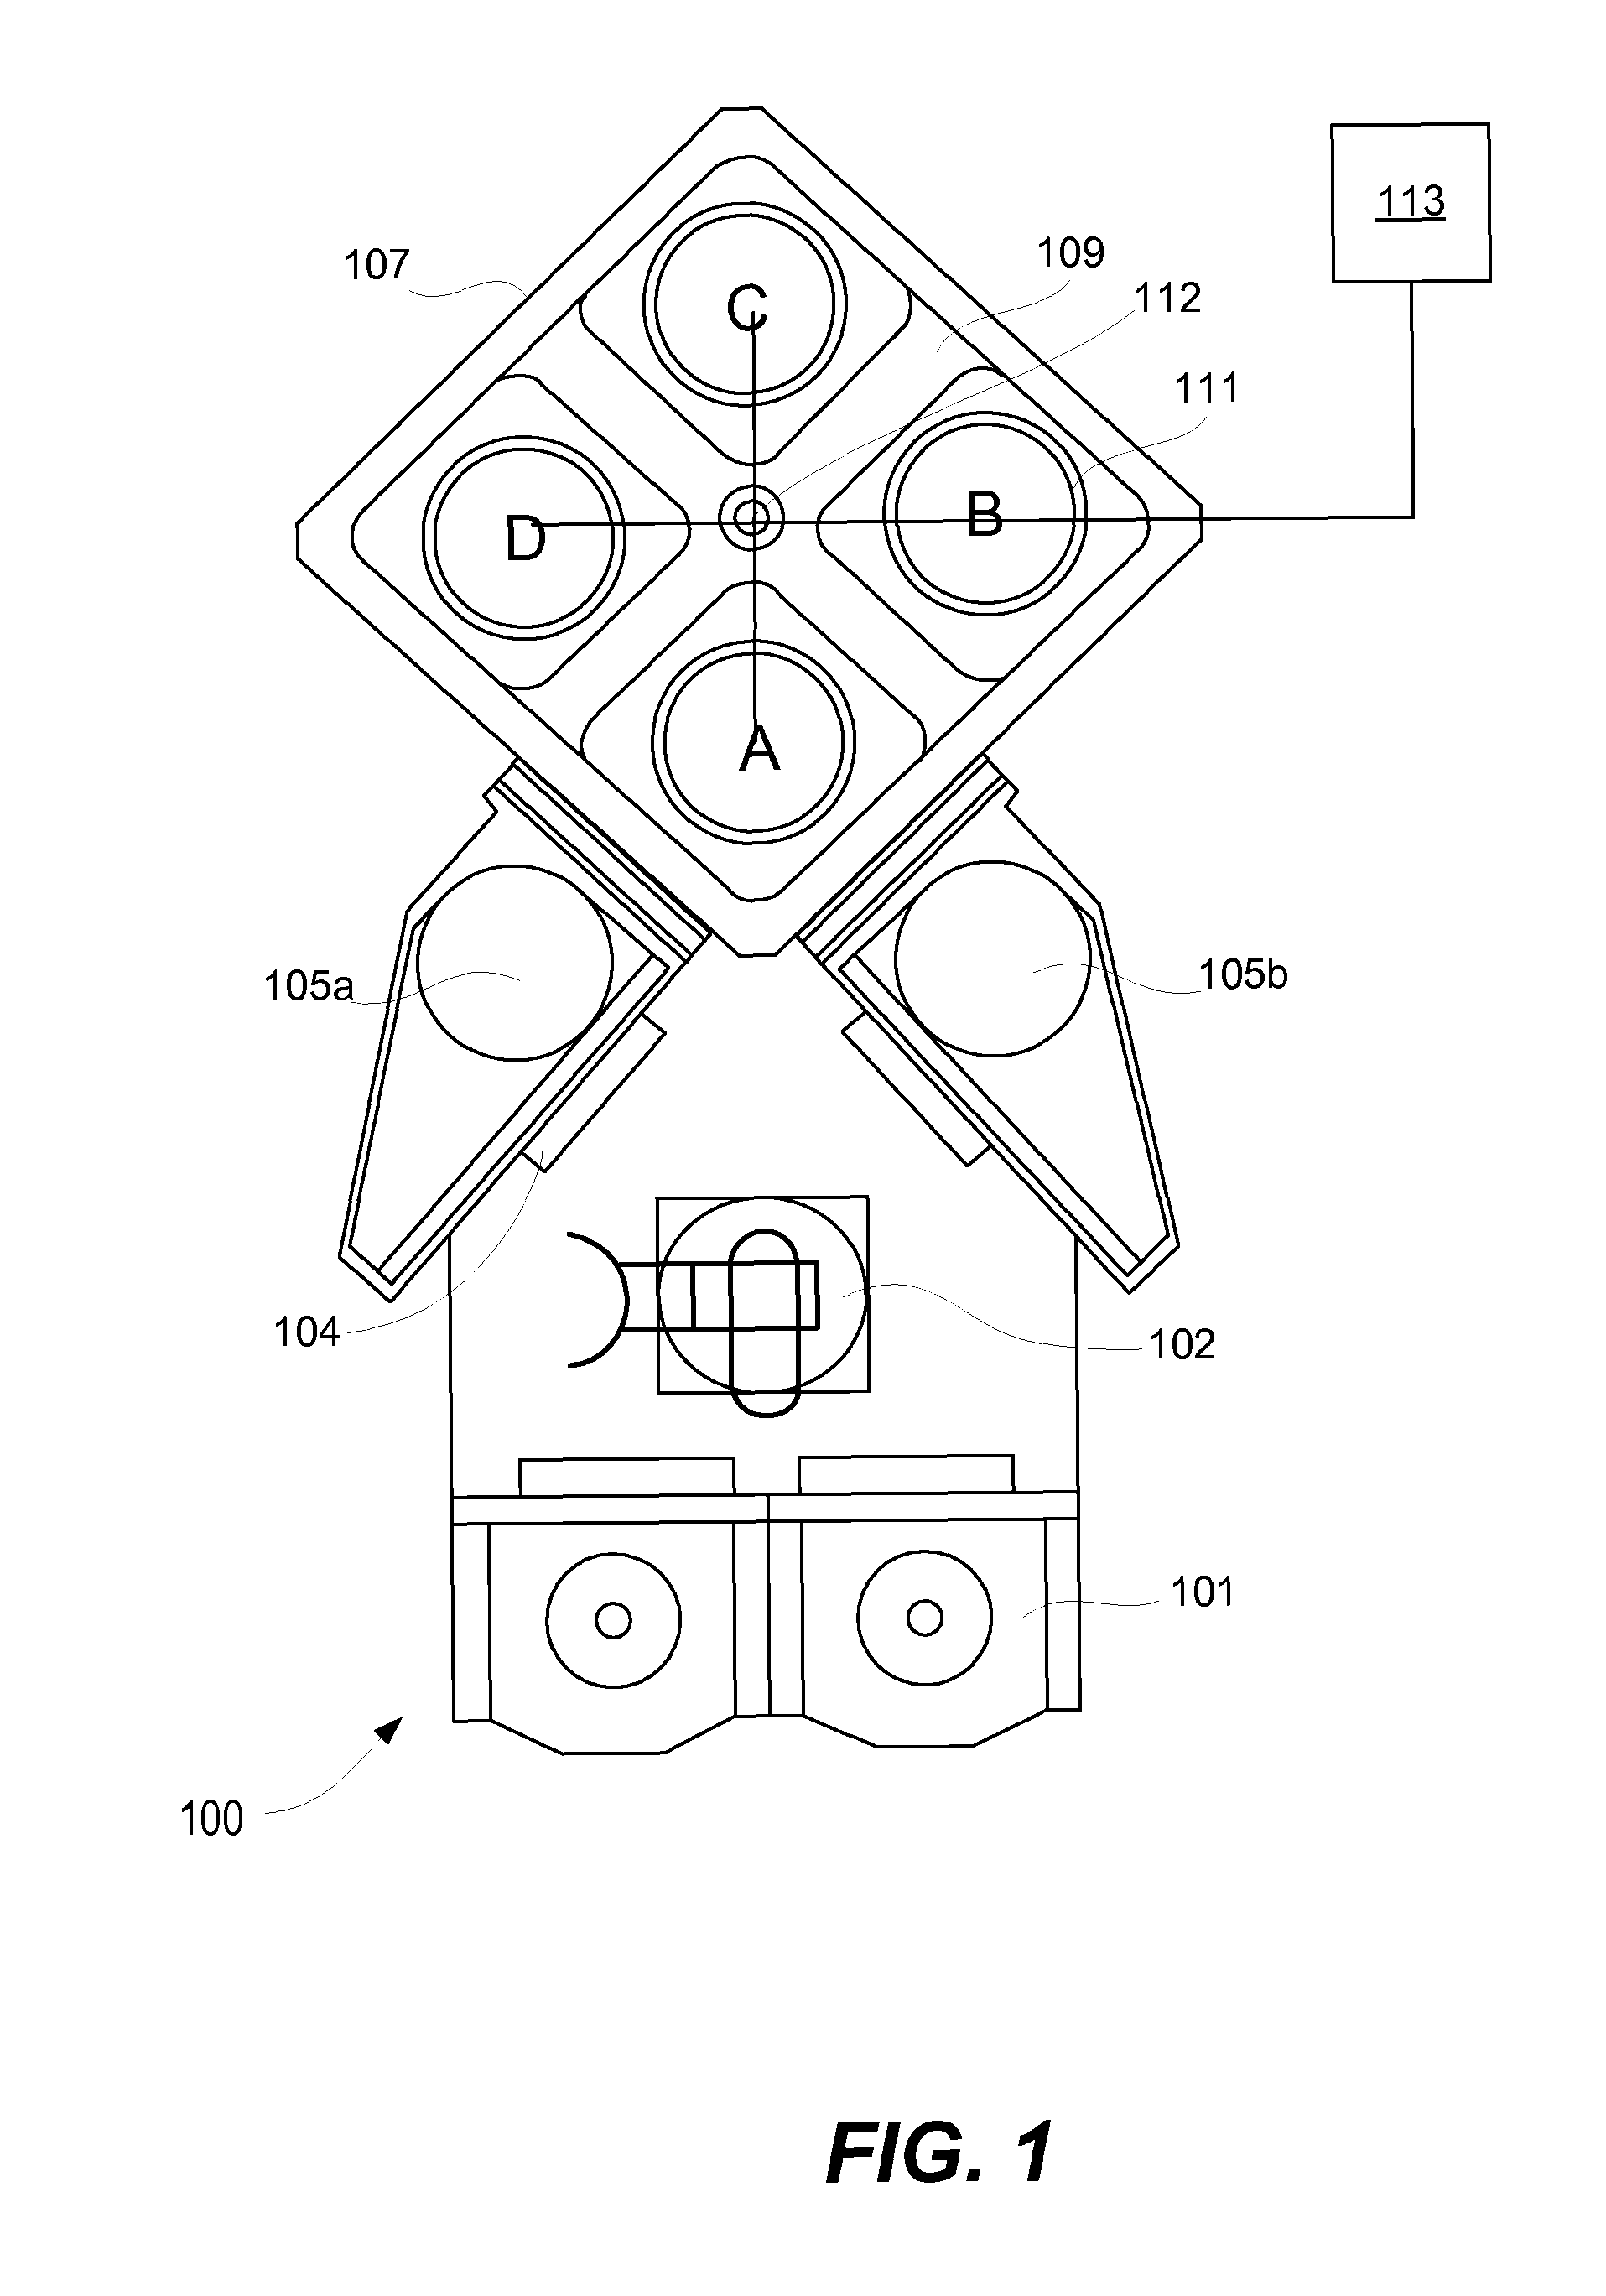 Closed loop control system for RF power balancing of the stations in a multi-station processing tool with shared RF source